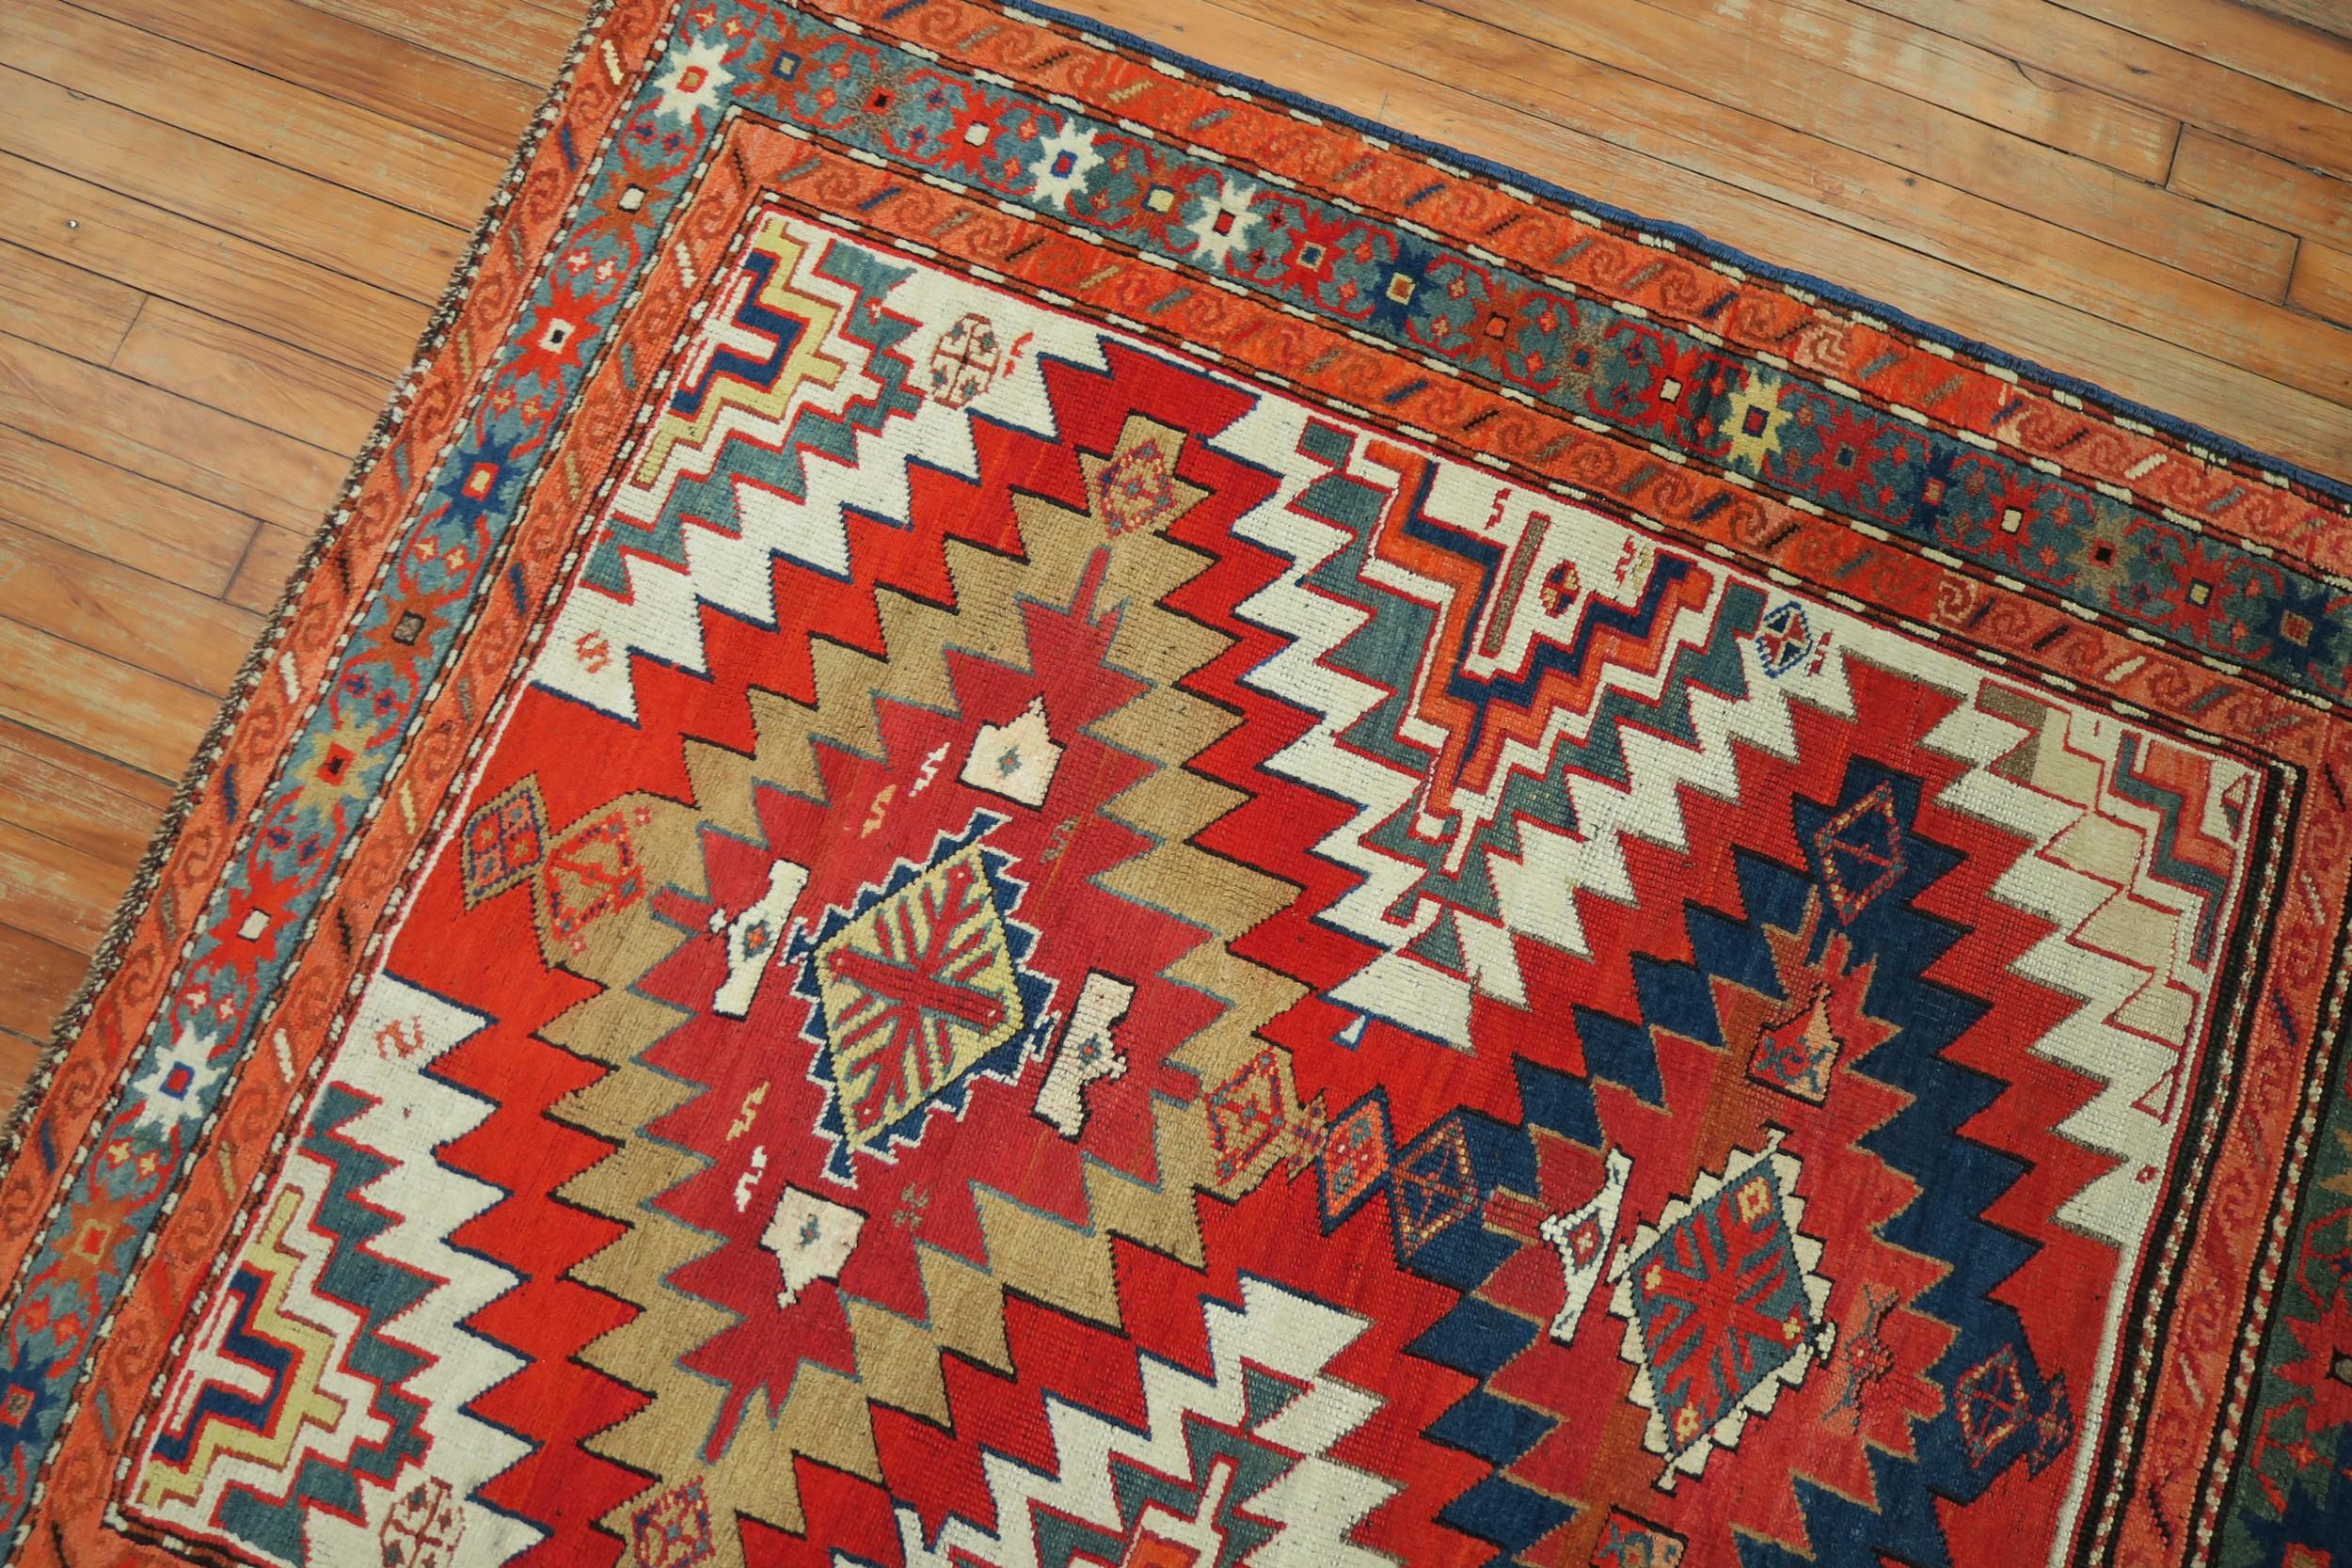 Dramatic Large Scale 20th Century Antique Russian Karabagh Square Rug In Good Condition For Sale In New York, NY